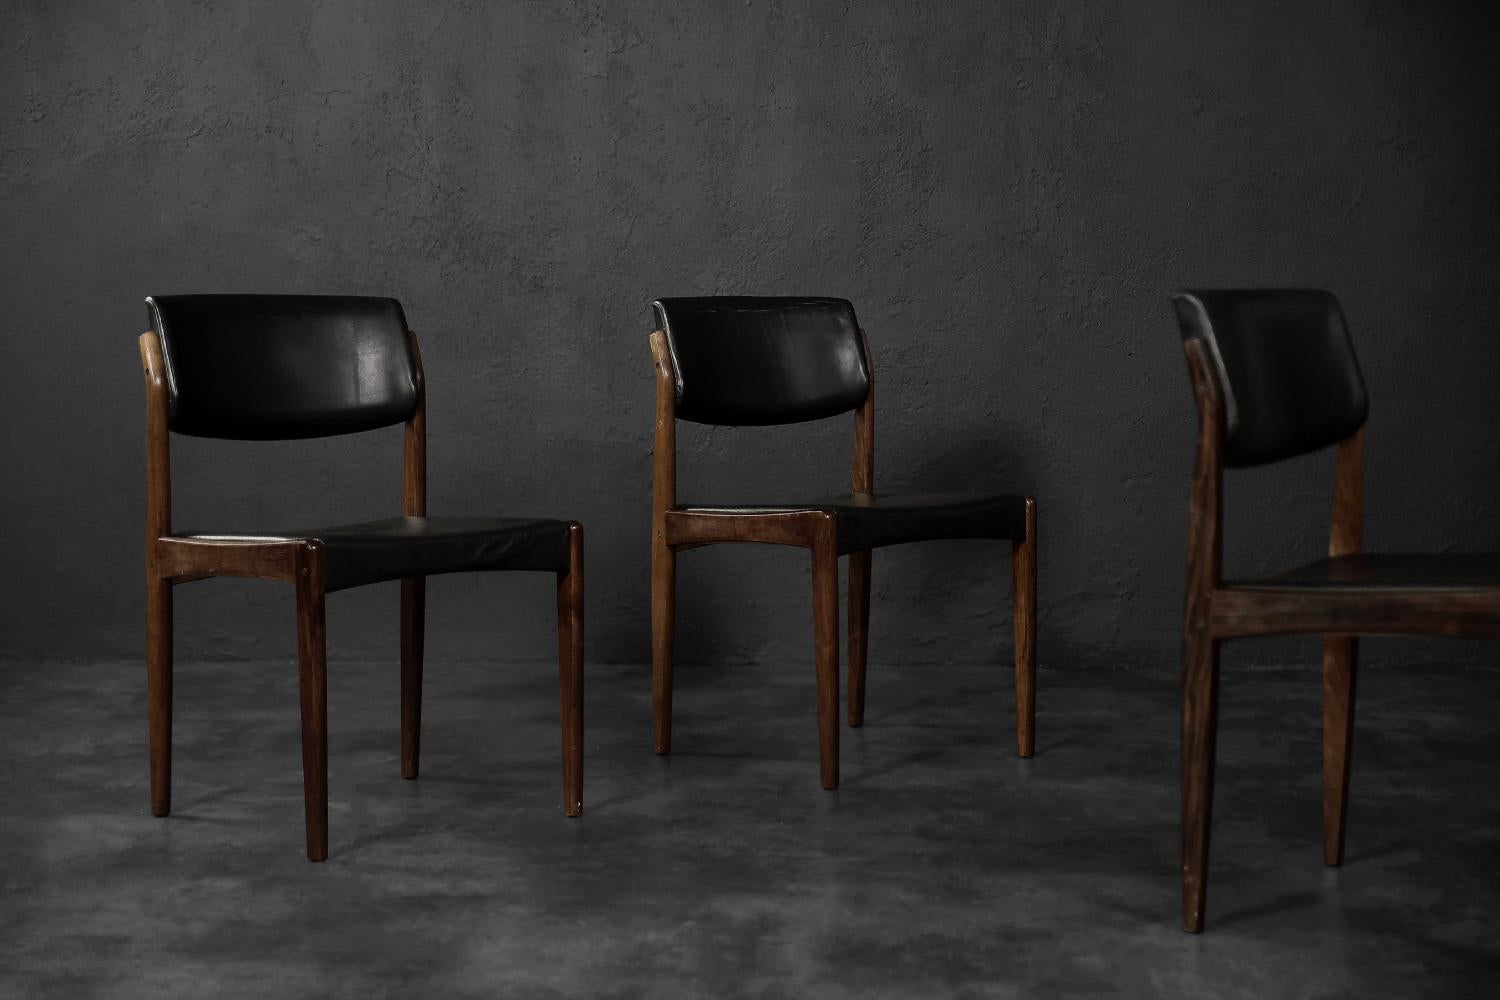 This set of three modernist chairs was designed by H.W. Klein for the Danish manufacturer Bramin during the 1960s. The frame of the chairs is made of dark brown rosewood. The backrest was slightly reclined. The seat is recessed into the chair frame,